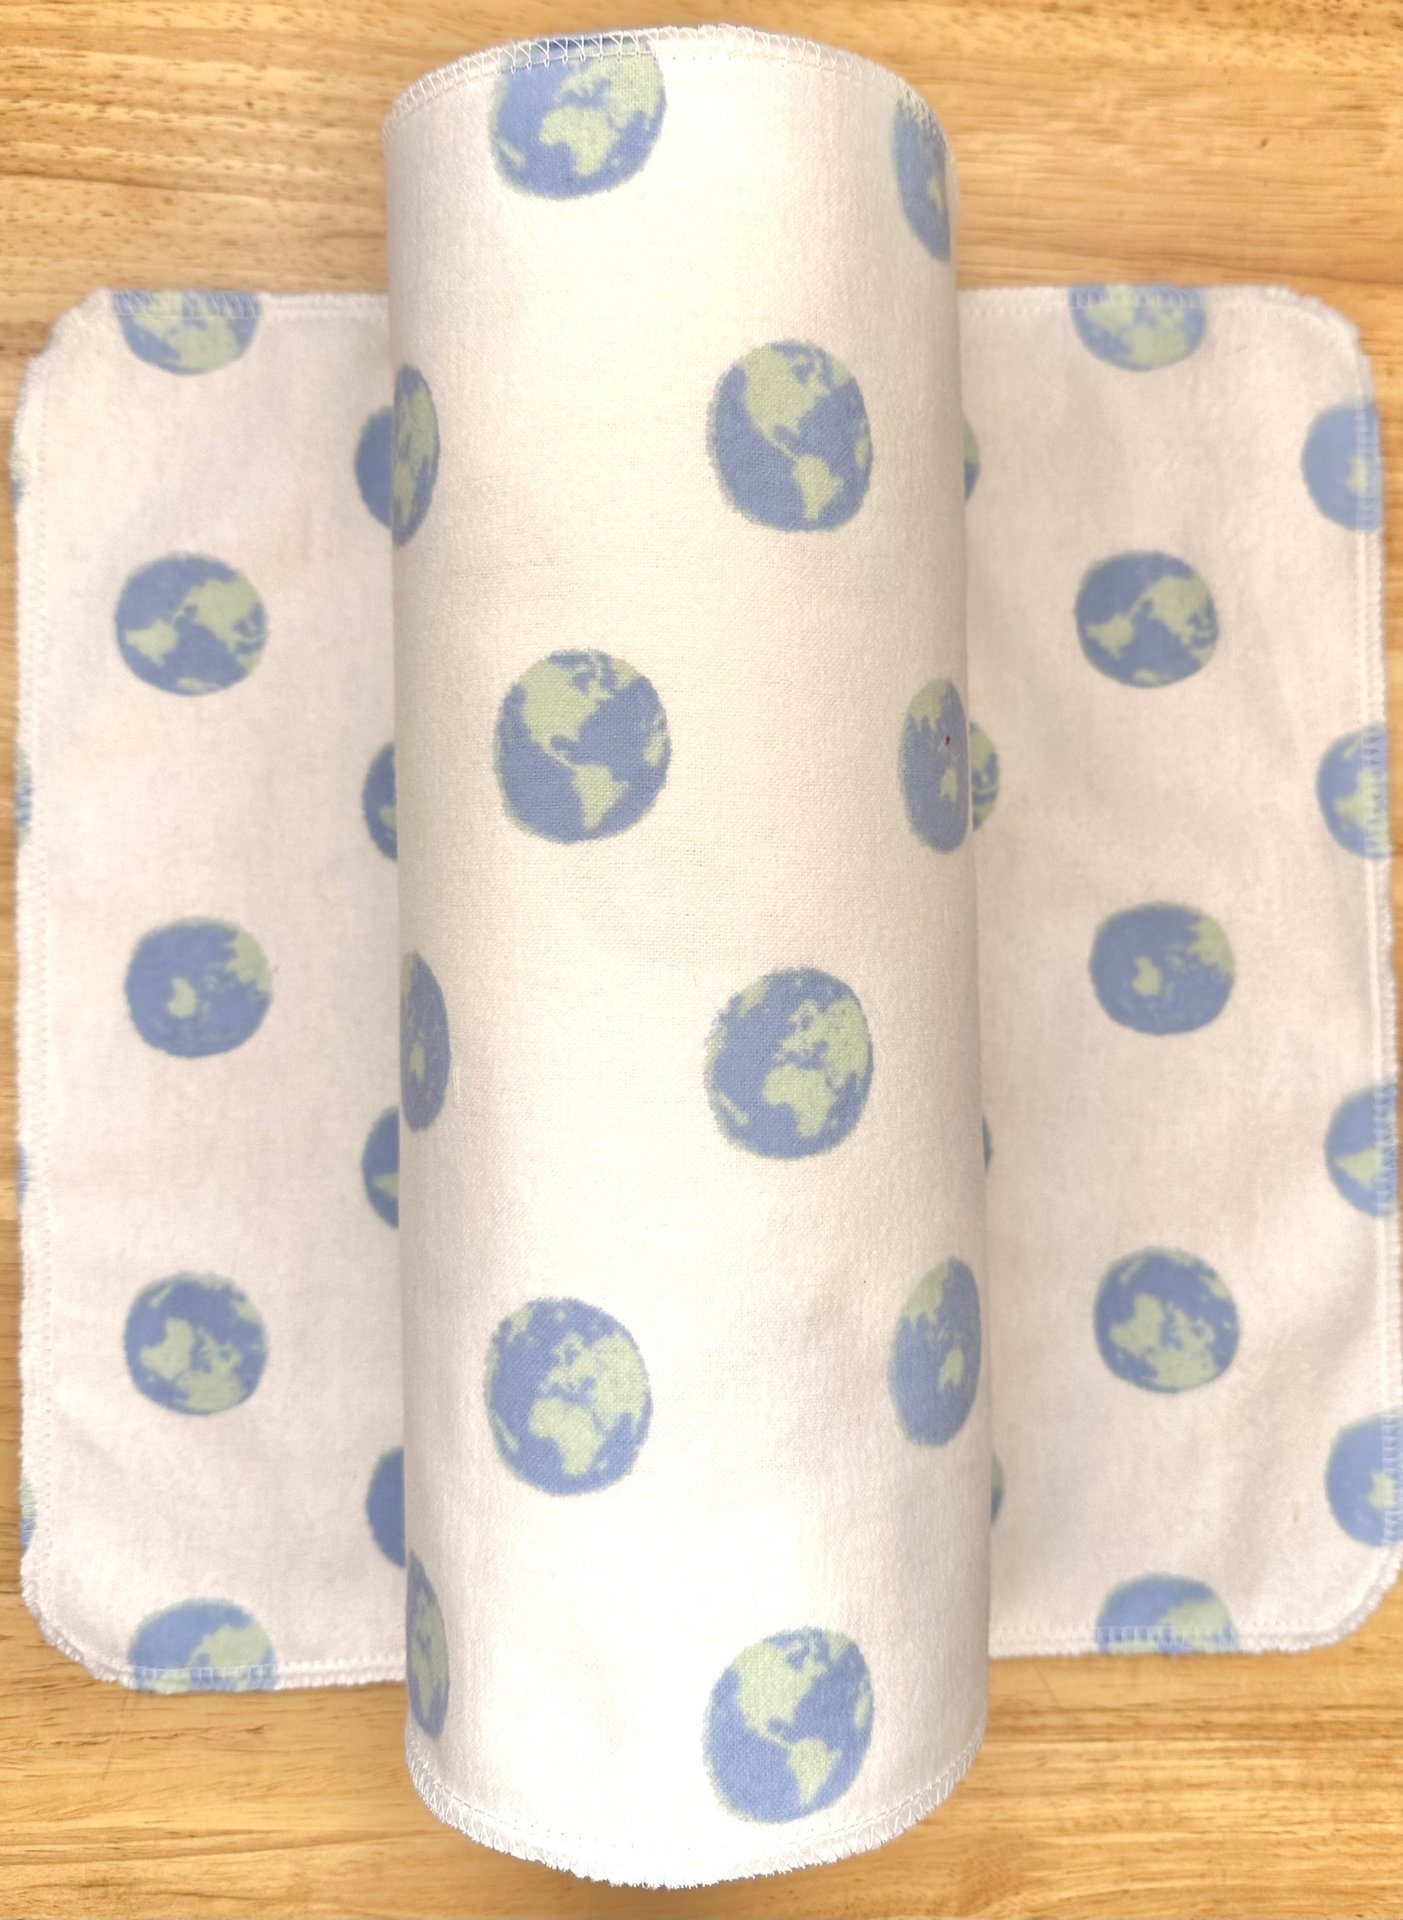 Earth Paperless Towels || Unpaper Towels || Eco Sustainable Zero Waste Kitchen